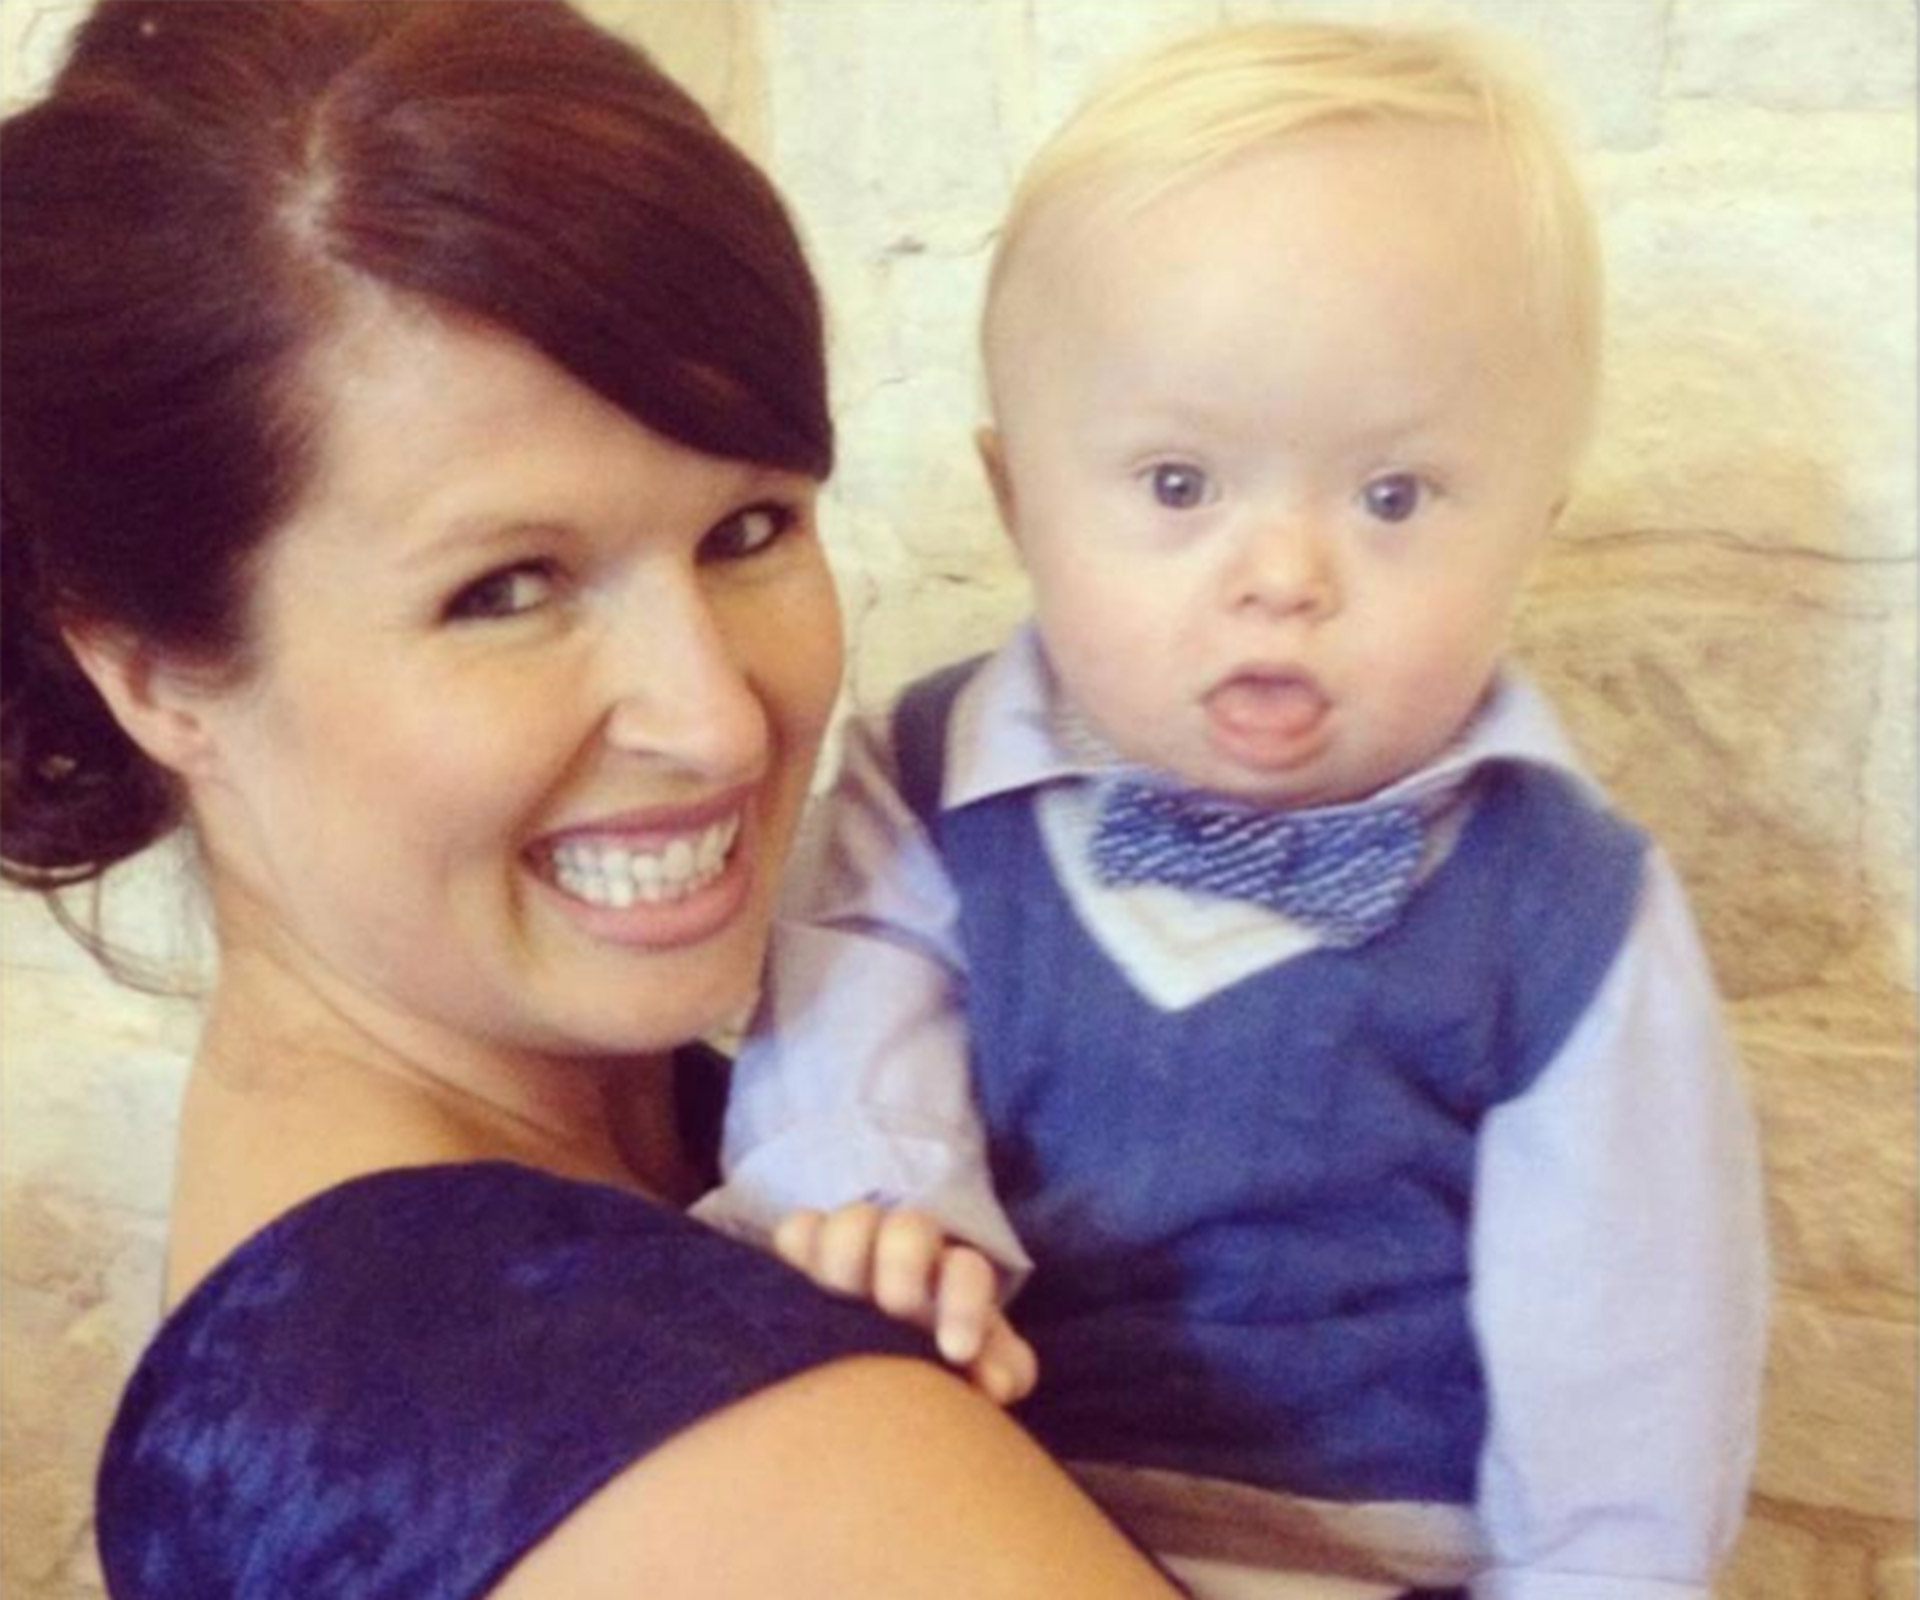 Mum of little boy with Down’s syndrome goes viral